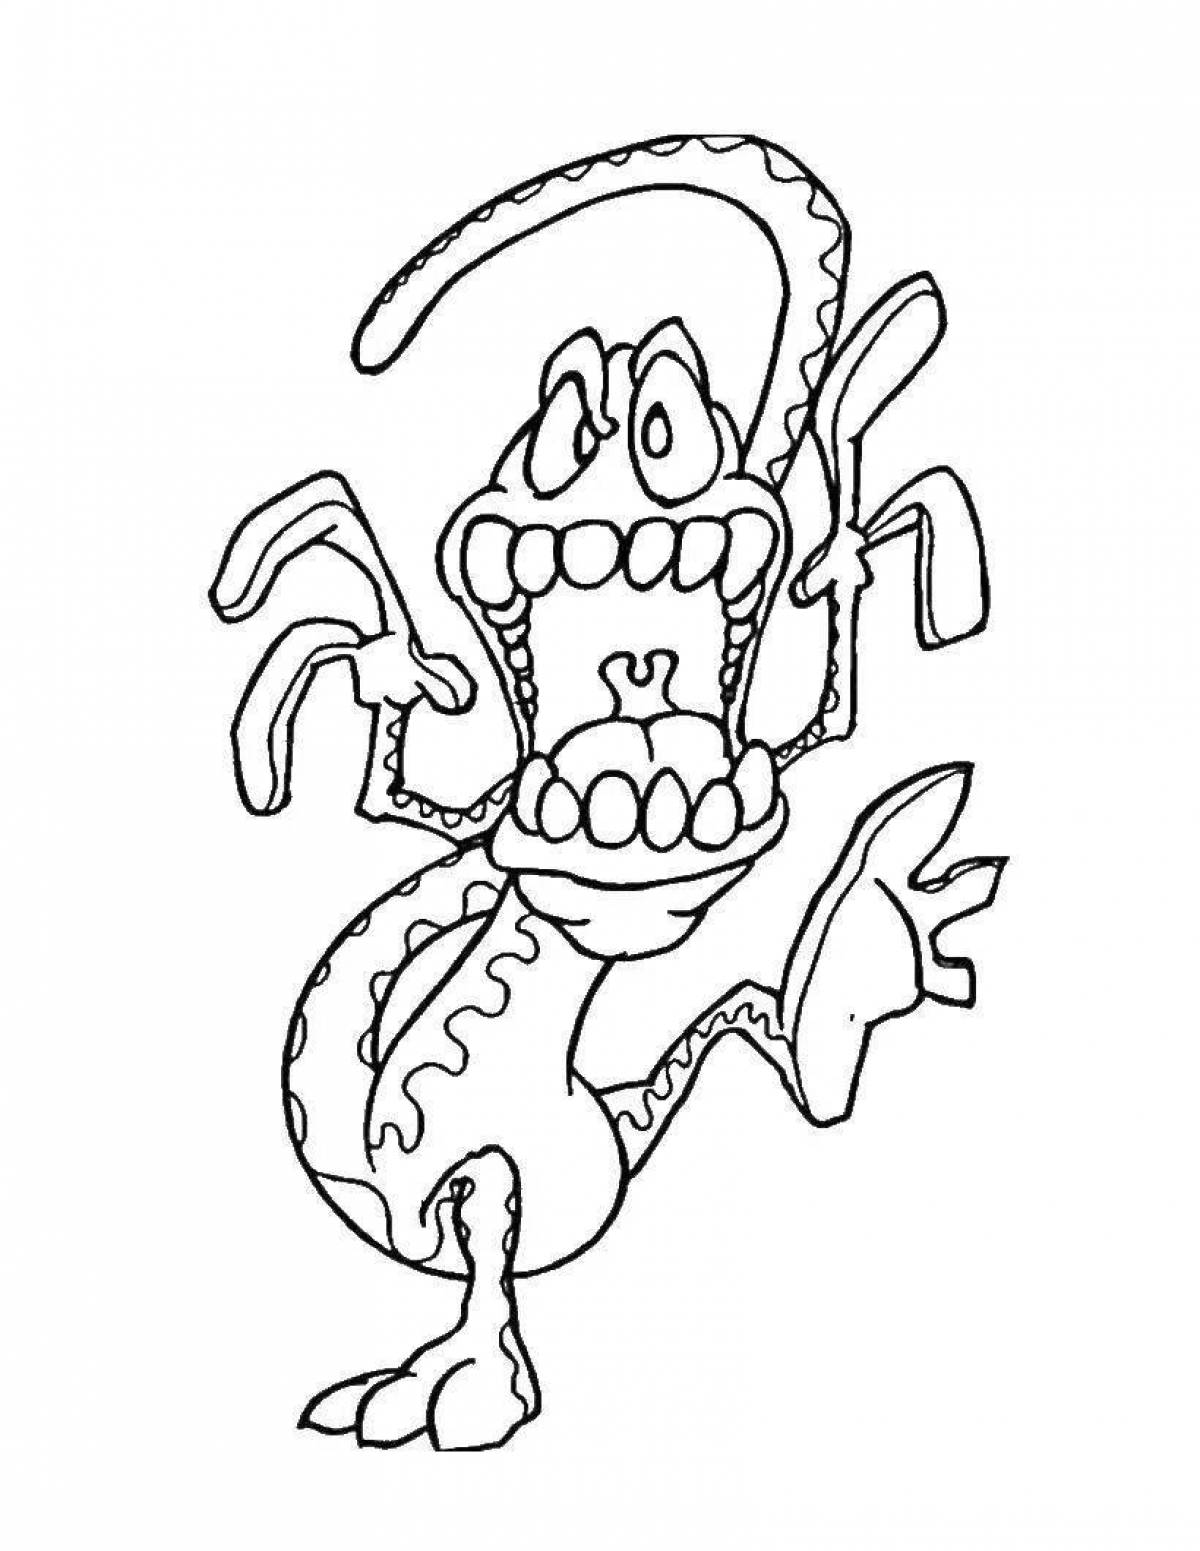 Coloring book repulsive scary monsters